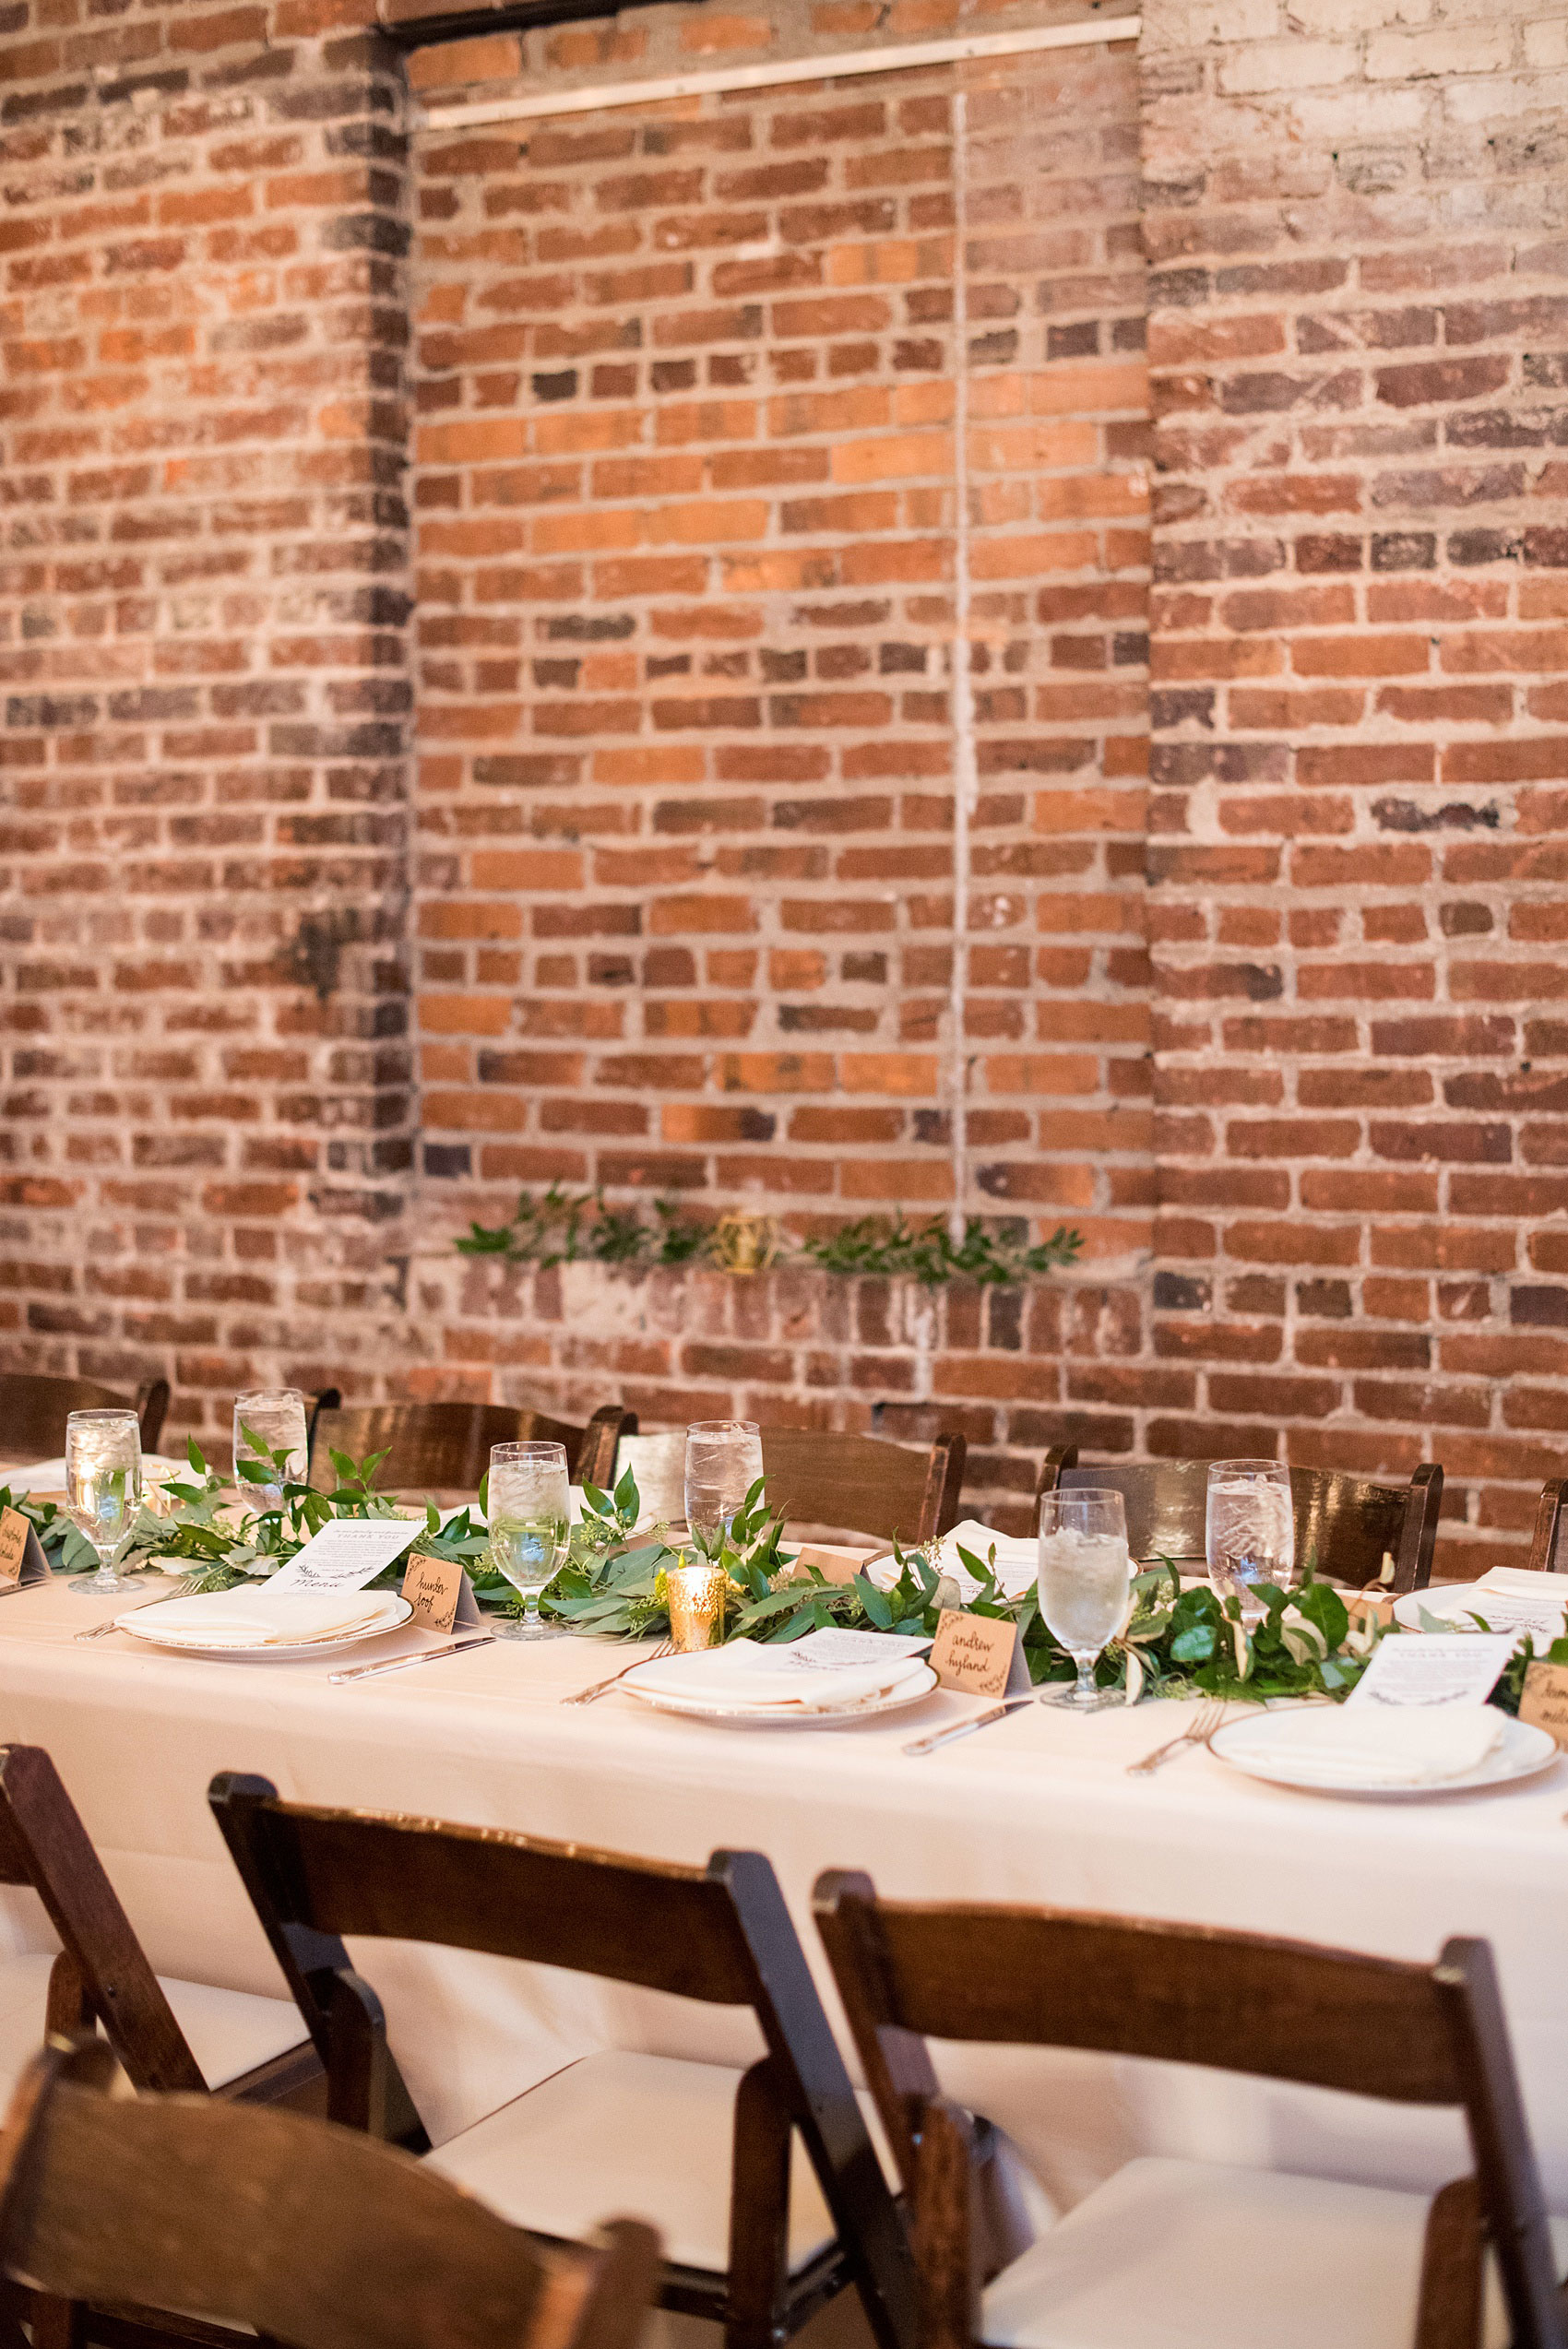 Pictures from a Christmas inspired wedding in downtown Raleigh, North Carolina by Mikkel Paige Photography. The bride and groom had a reception at the rustic venue, The Stockroom at 230, with pink linens, candlelight and greenery details. Click through for more ideas from their beautiful celebration with a pink and gold palette! #mikkelpaige #raleighweddingphotographer #downtownRaleigh #holidaywedding #ChristmasWedding #headtabledetails